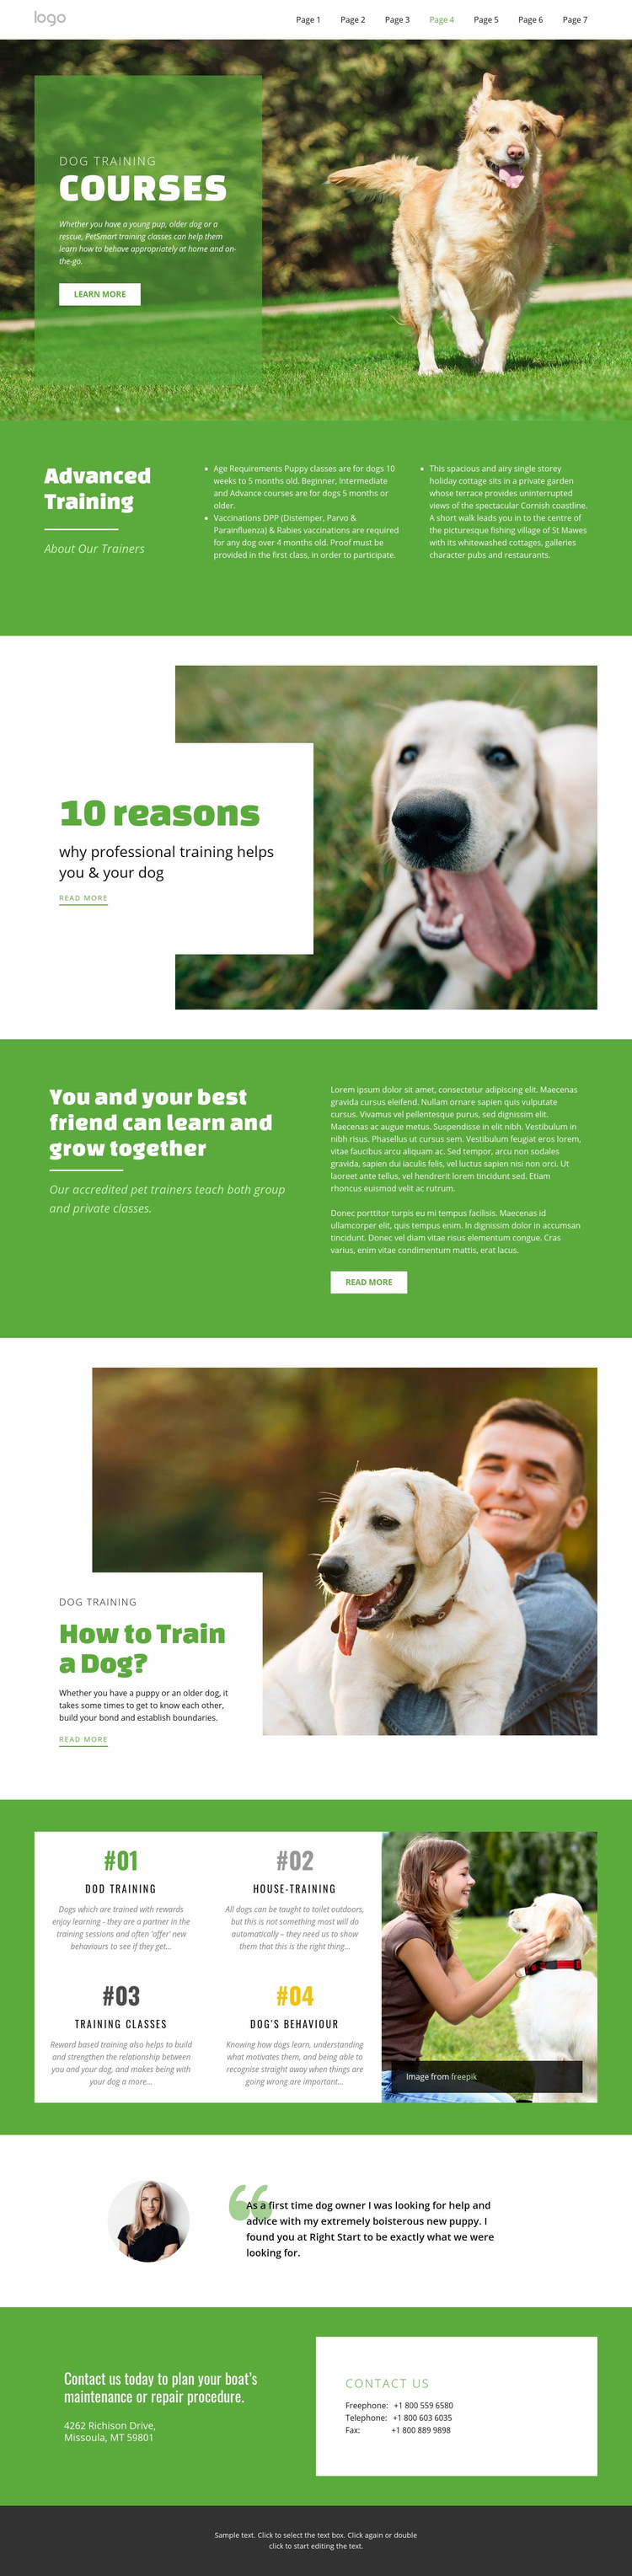 Training courses for pets Web Page Design